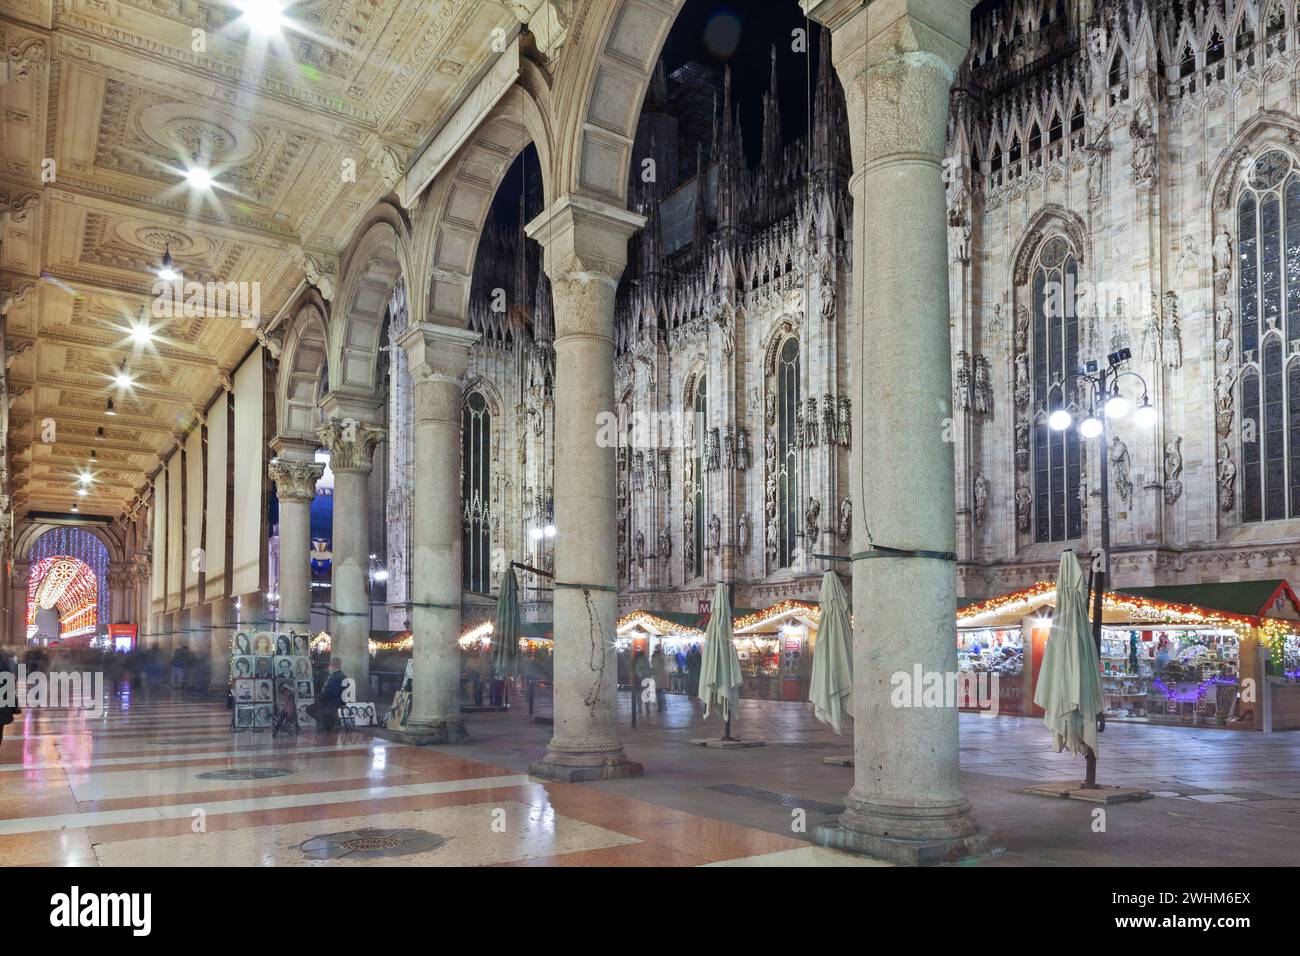 Night view of the Duomo di Milano through the arches of the Vittorio Emanuele II gallery during Christmas time. Stock Photo